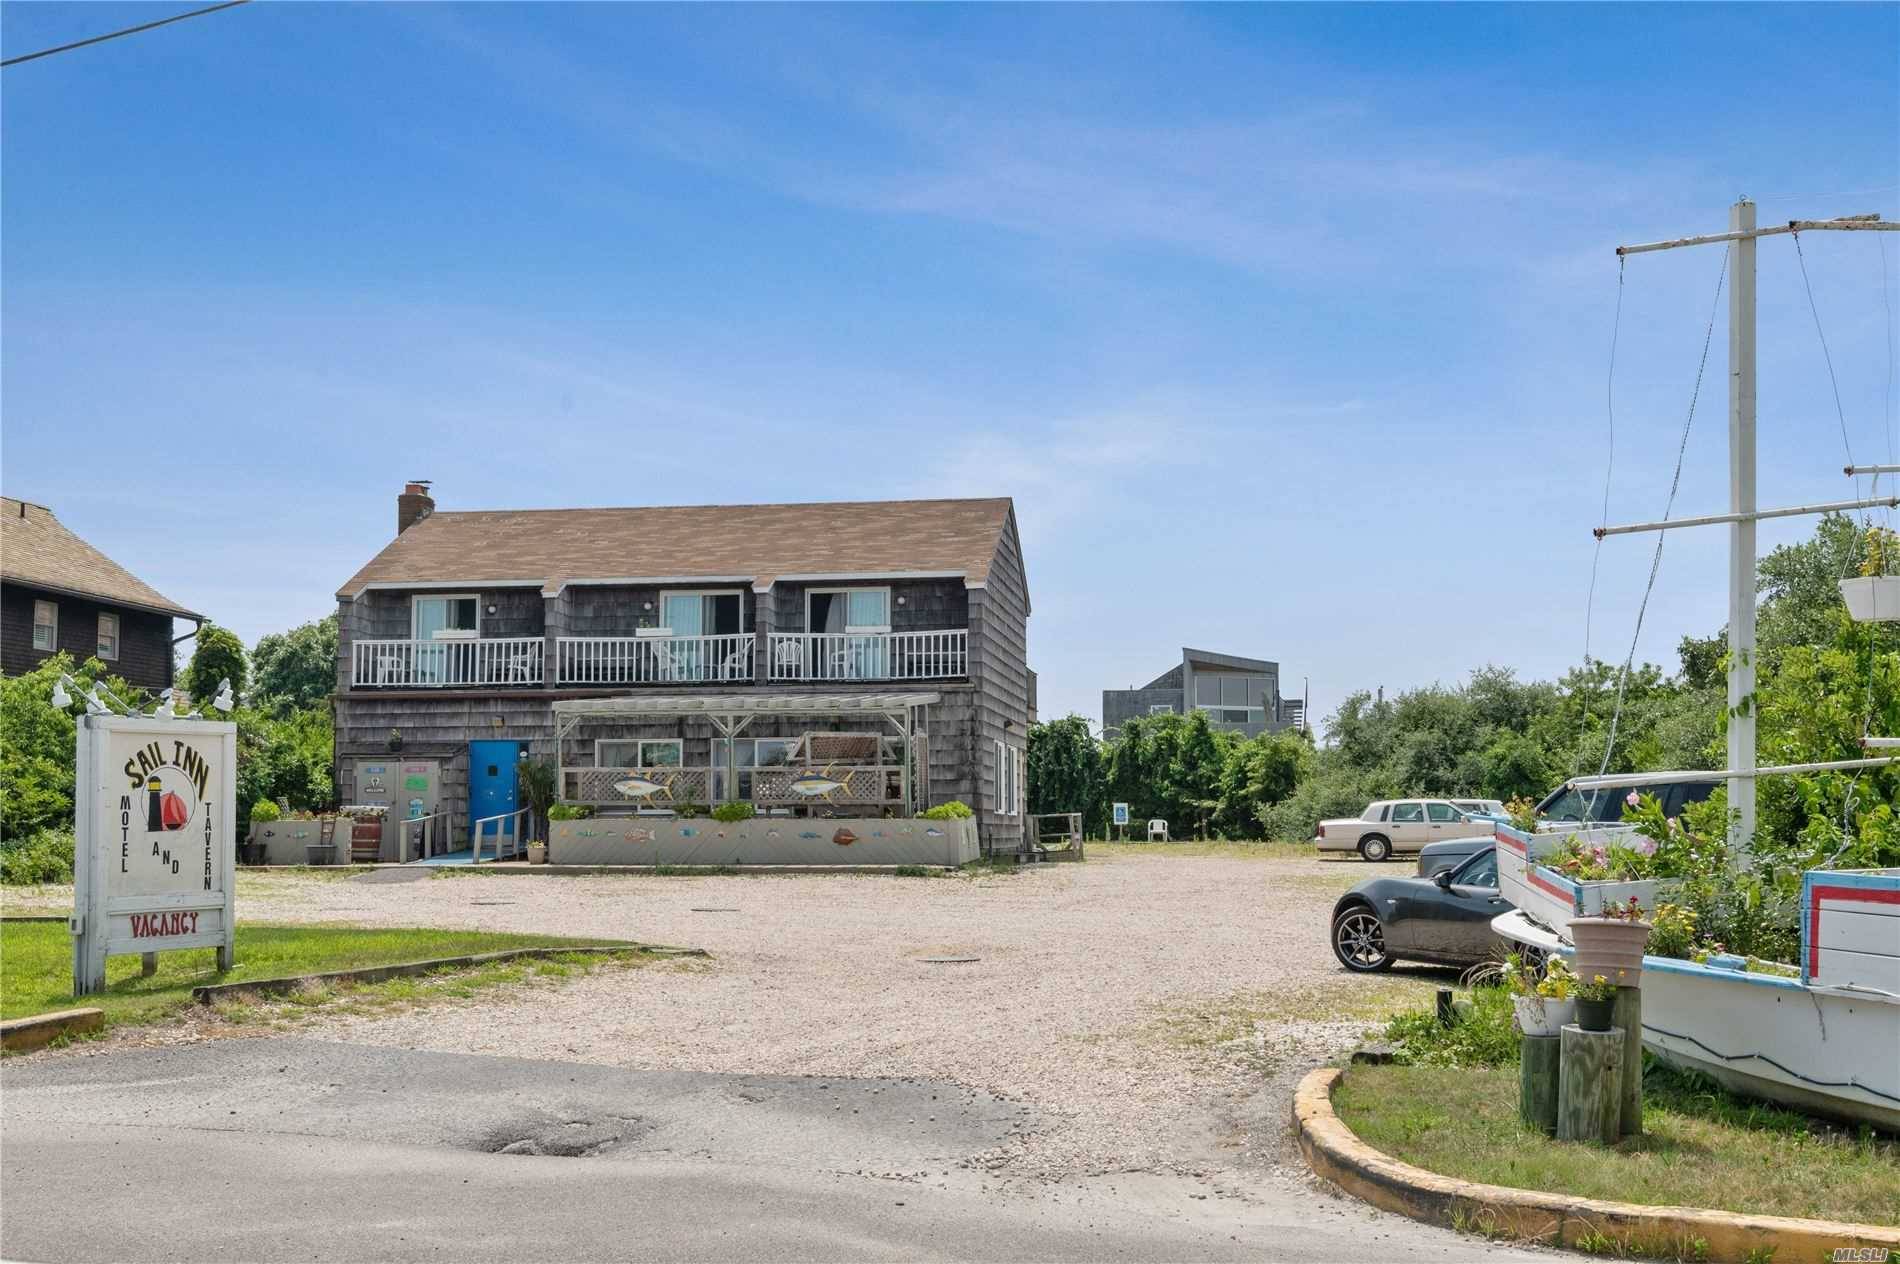 50 seat established restaurant bar with outside patio and 10 en suite oversized motel rooms, oversized septic system and 27 private parking spaces, public water, Central Business zoned, 1, 188 ...